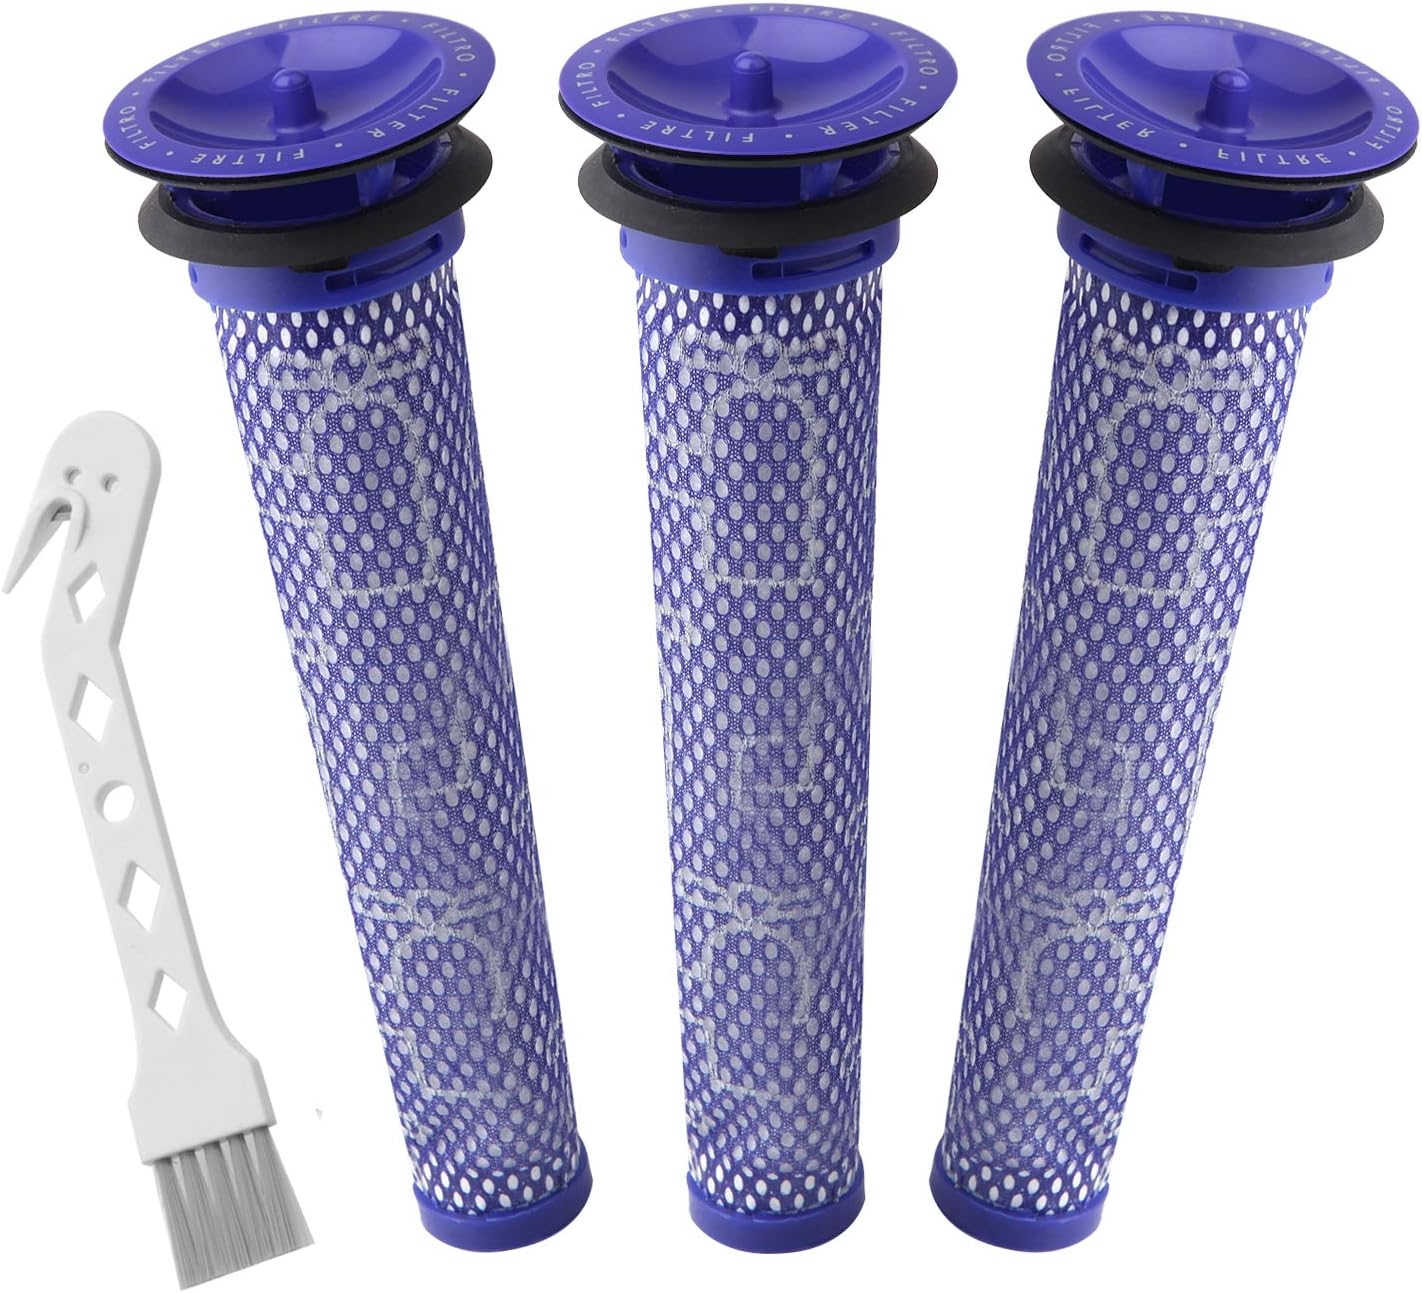 Wolfish 3 Pack Pre Filters for Dyson DC58, DC59, V6, V7, V8. Replacements Part # 965661-01. 3 Filters Kit for Dyson Filter Replacements